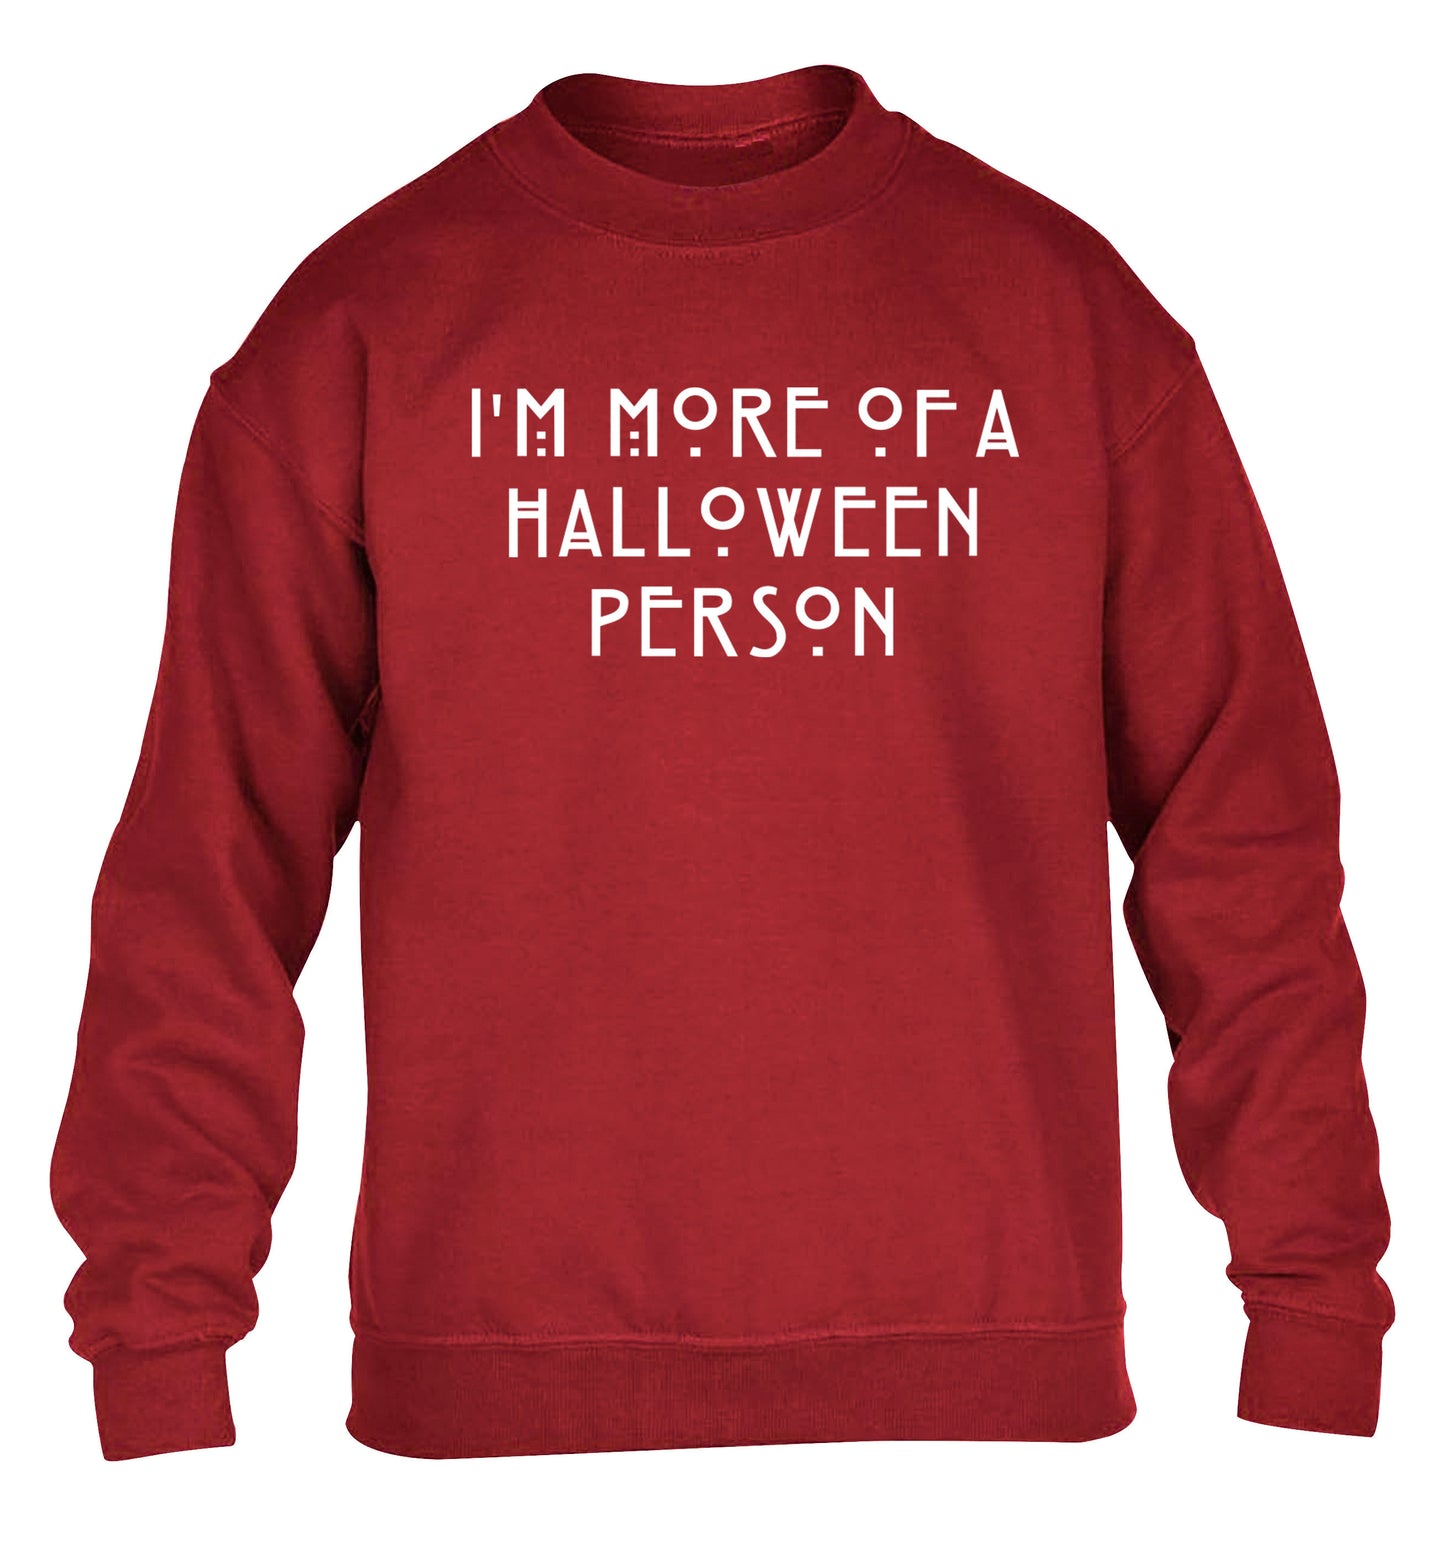 I'm more of a halloween person children's grey sweater 12-14 Years